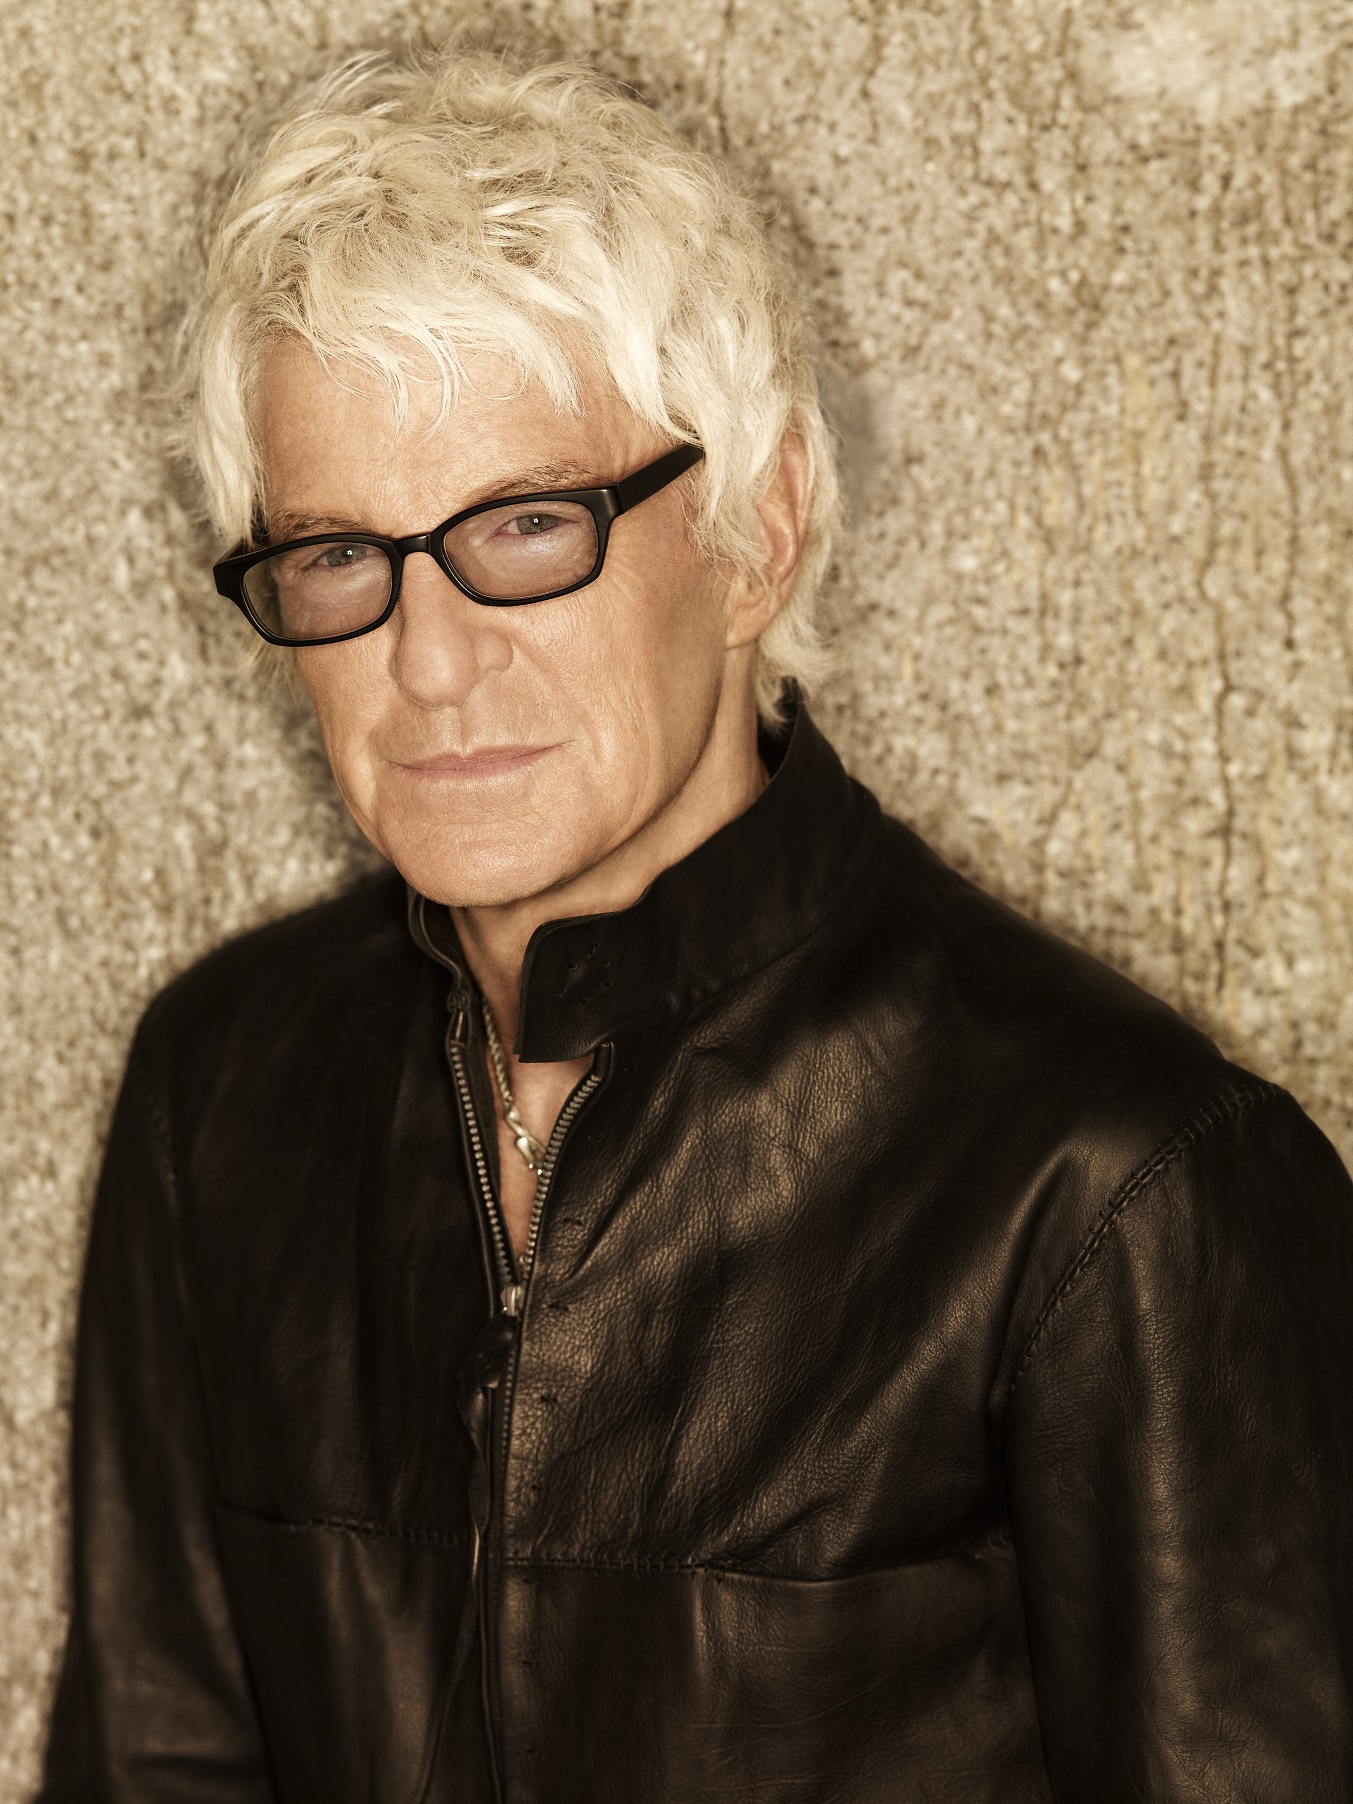 Stoney Talks With REO Speedwagon's Kevin Cronin About The UpcomIng Show At Spartanburg Memorial Auditorium 